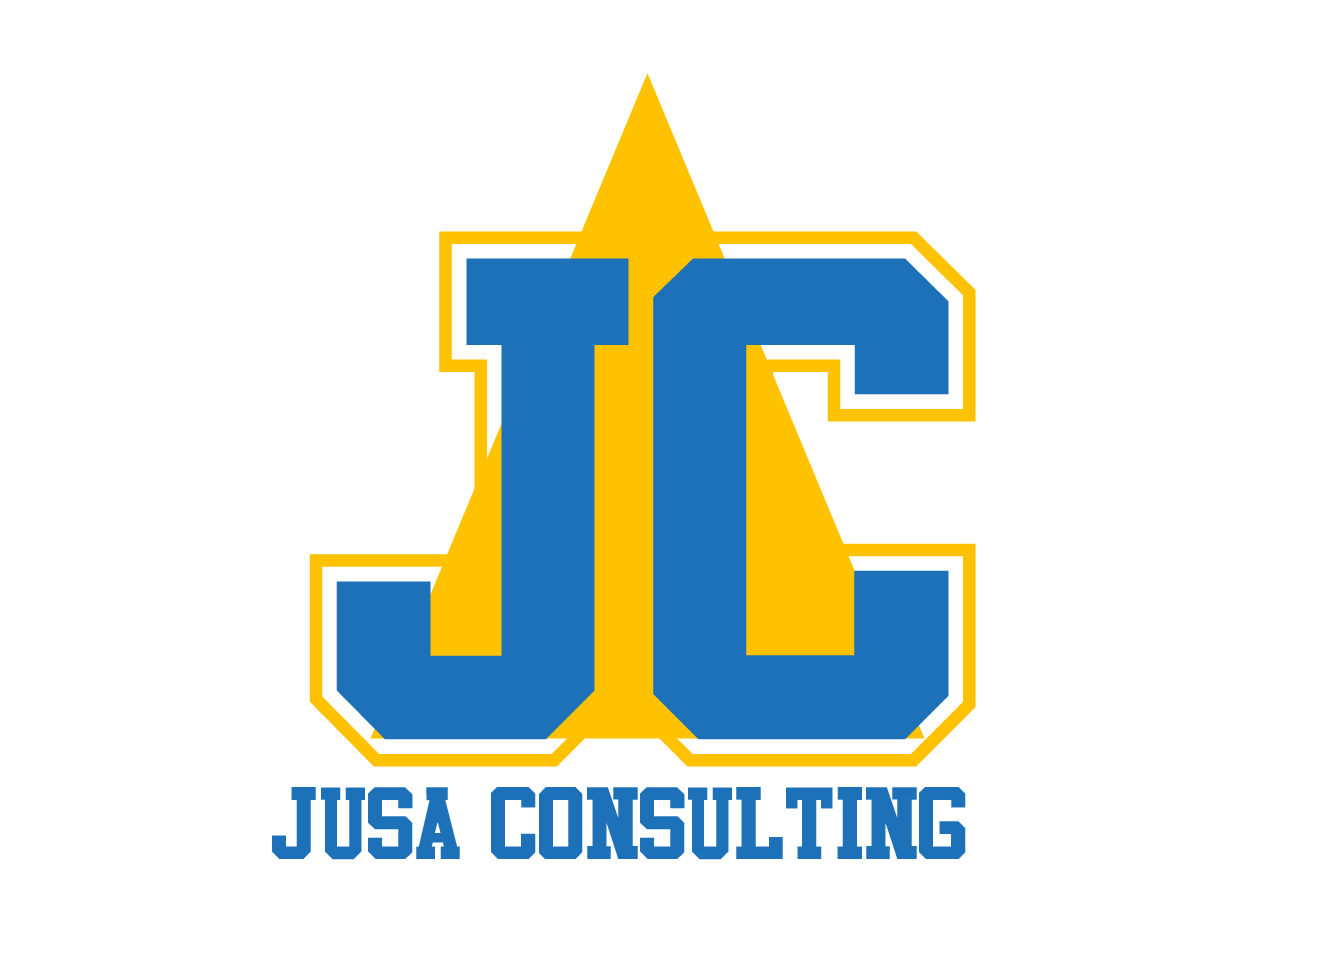 Jusa consulting